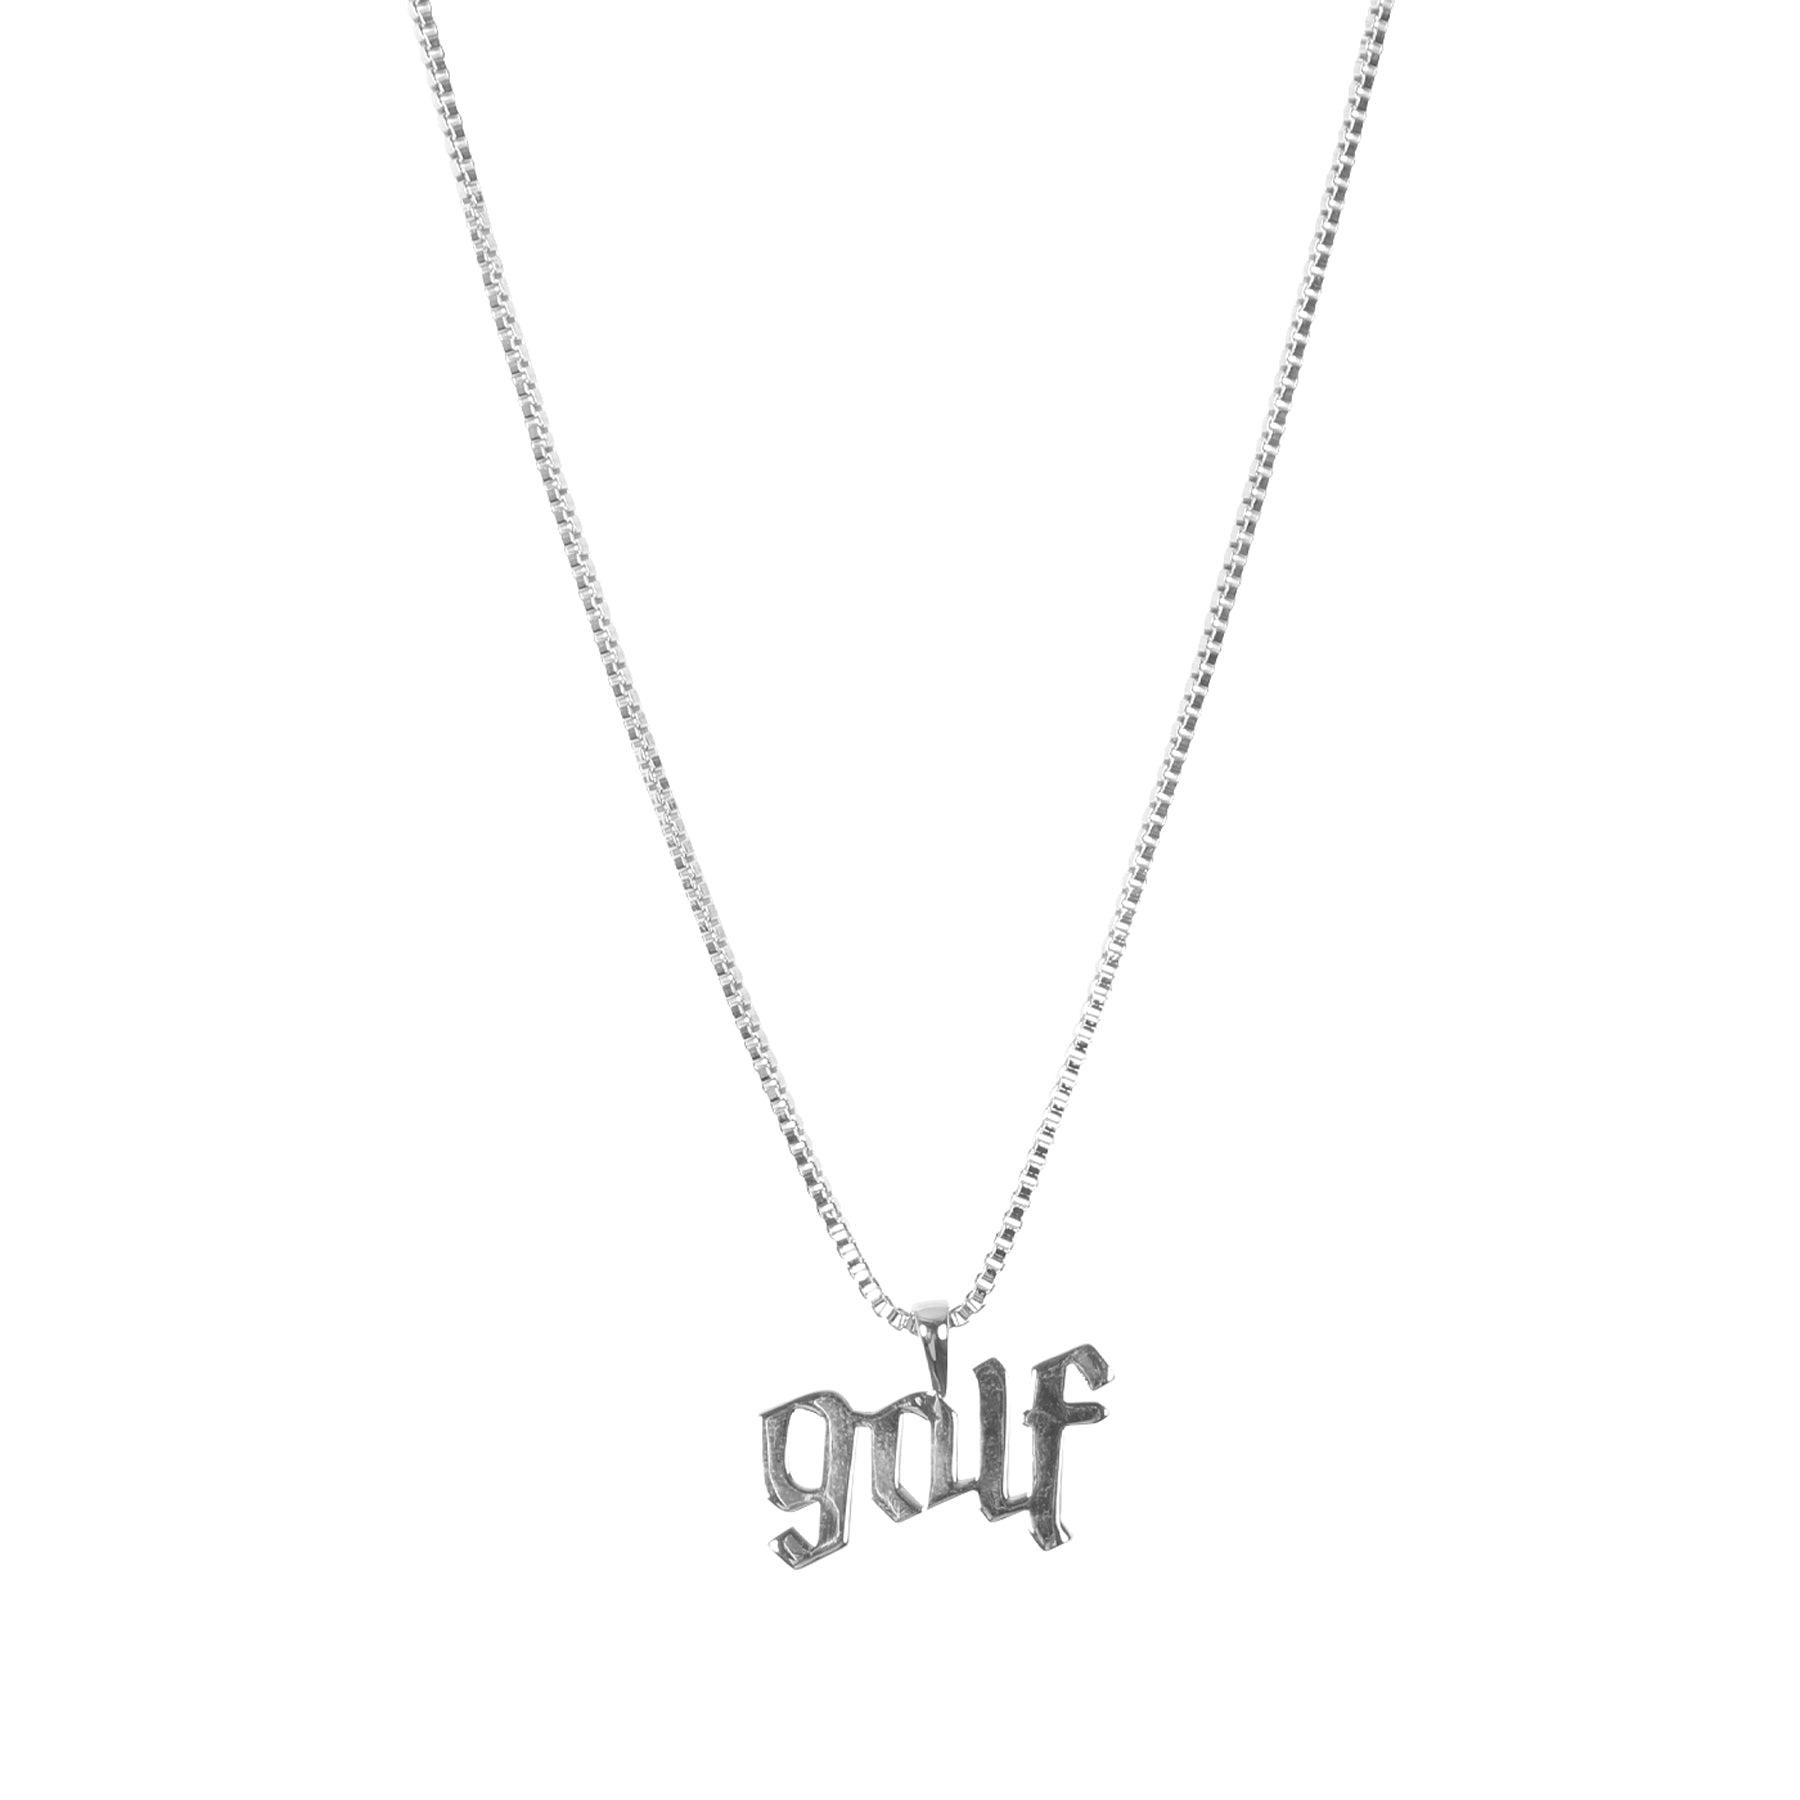 OLDE GOLF NECKLACE BY GOLF WANG